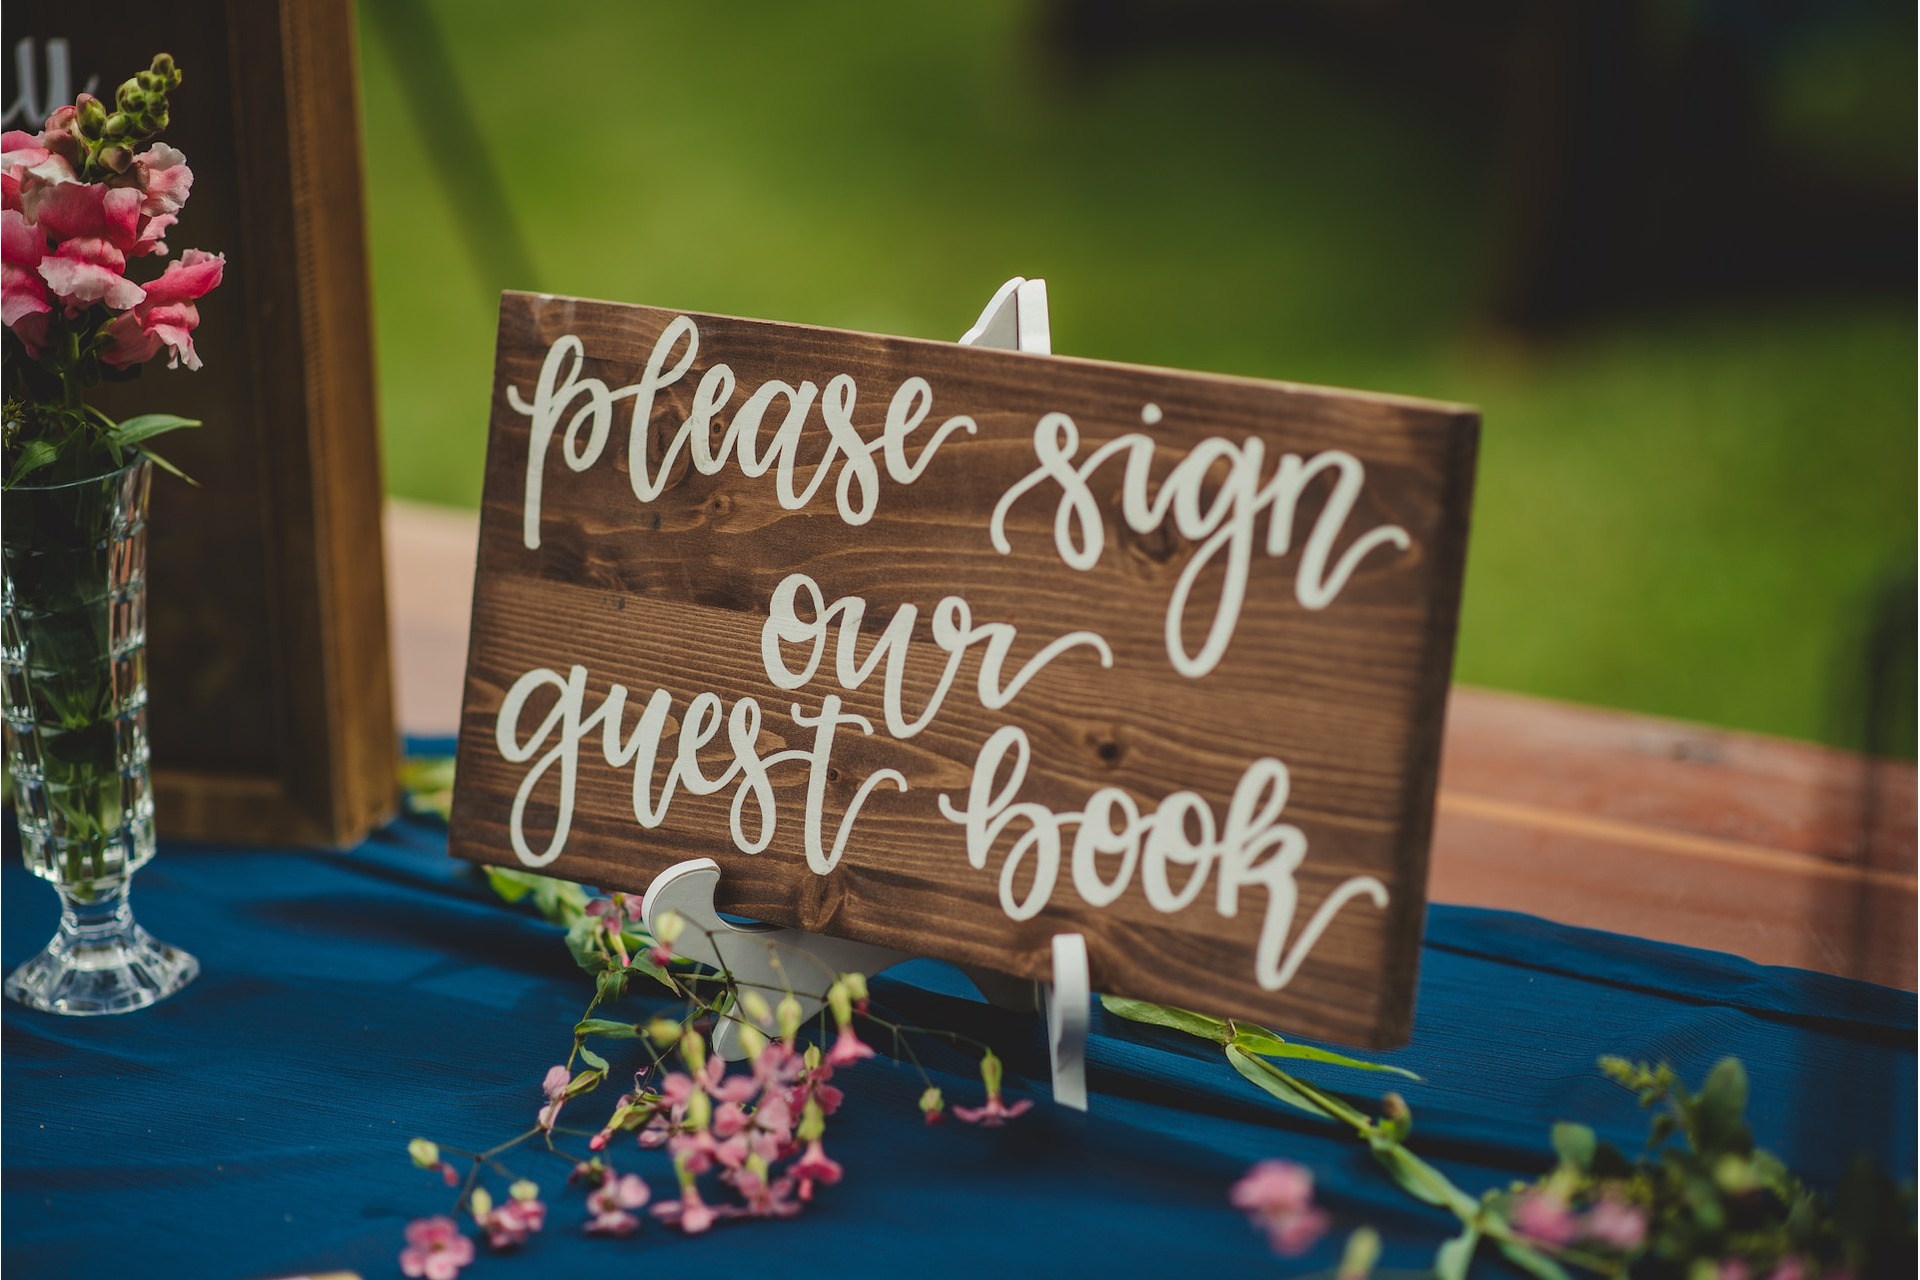 Sign on a table with the words, 'please sing our guest book'